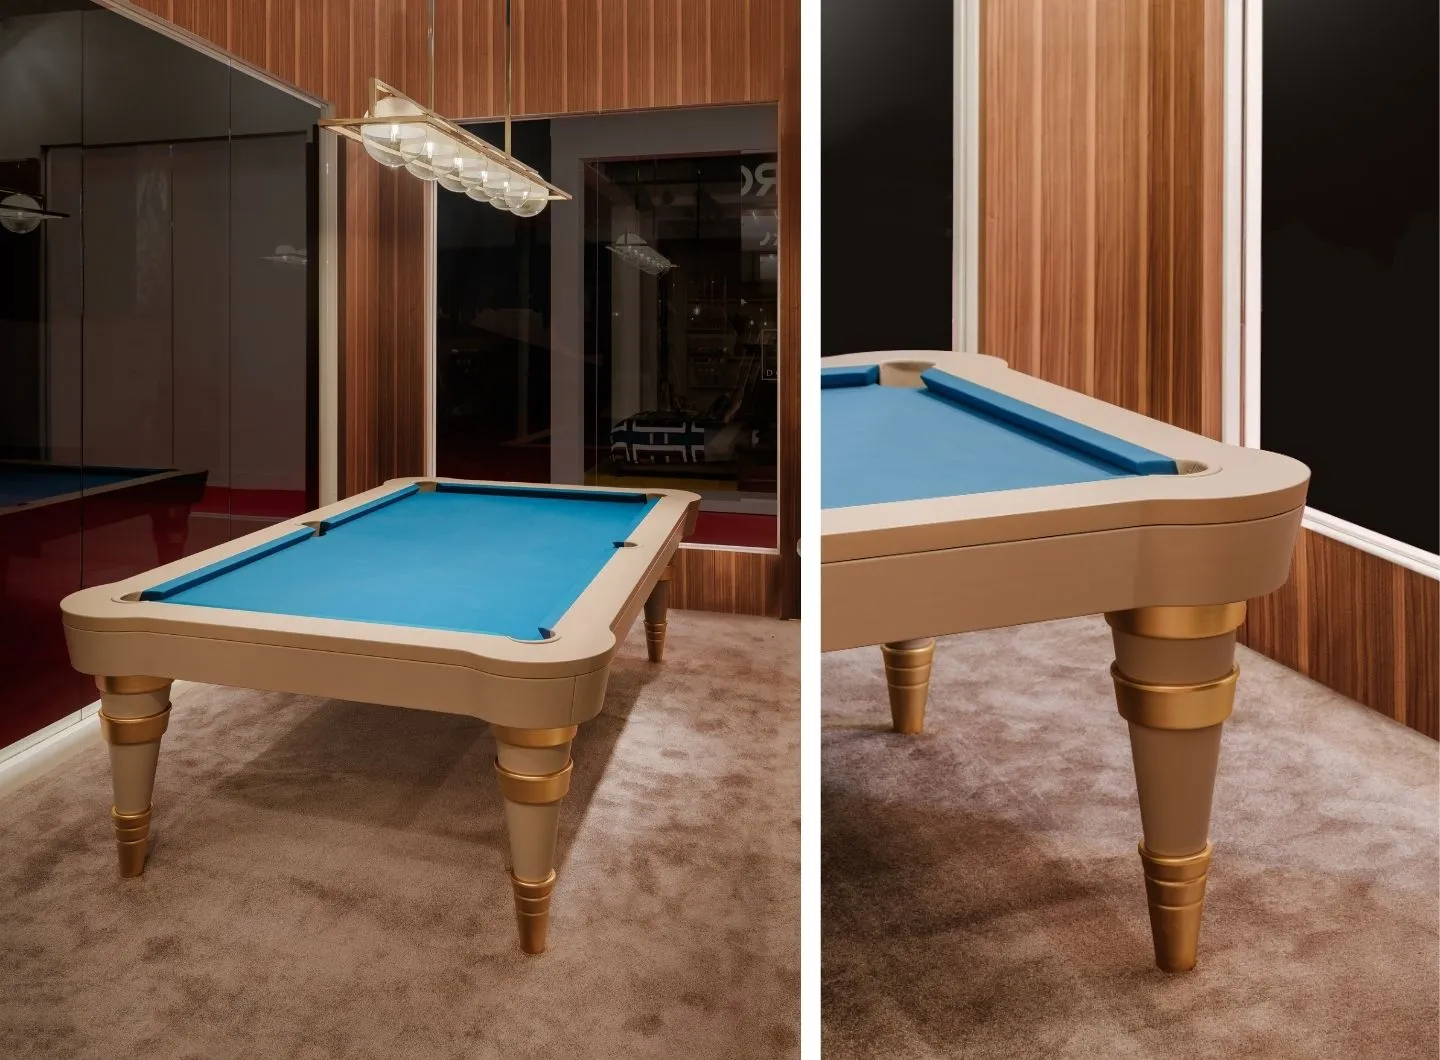 luxury pool table by Vismara Design with blue cloth